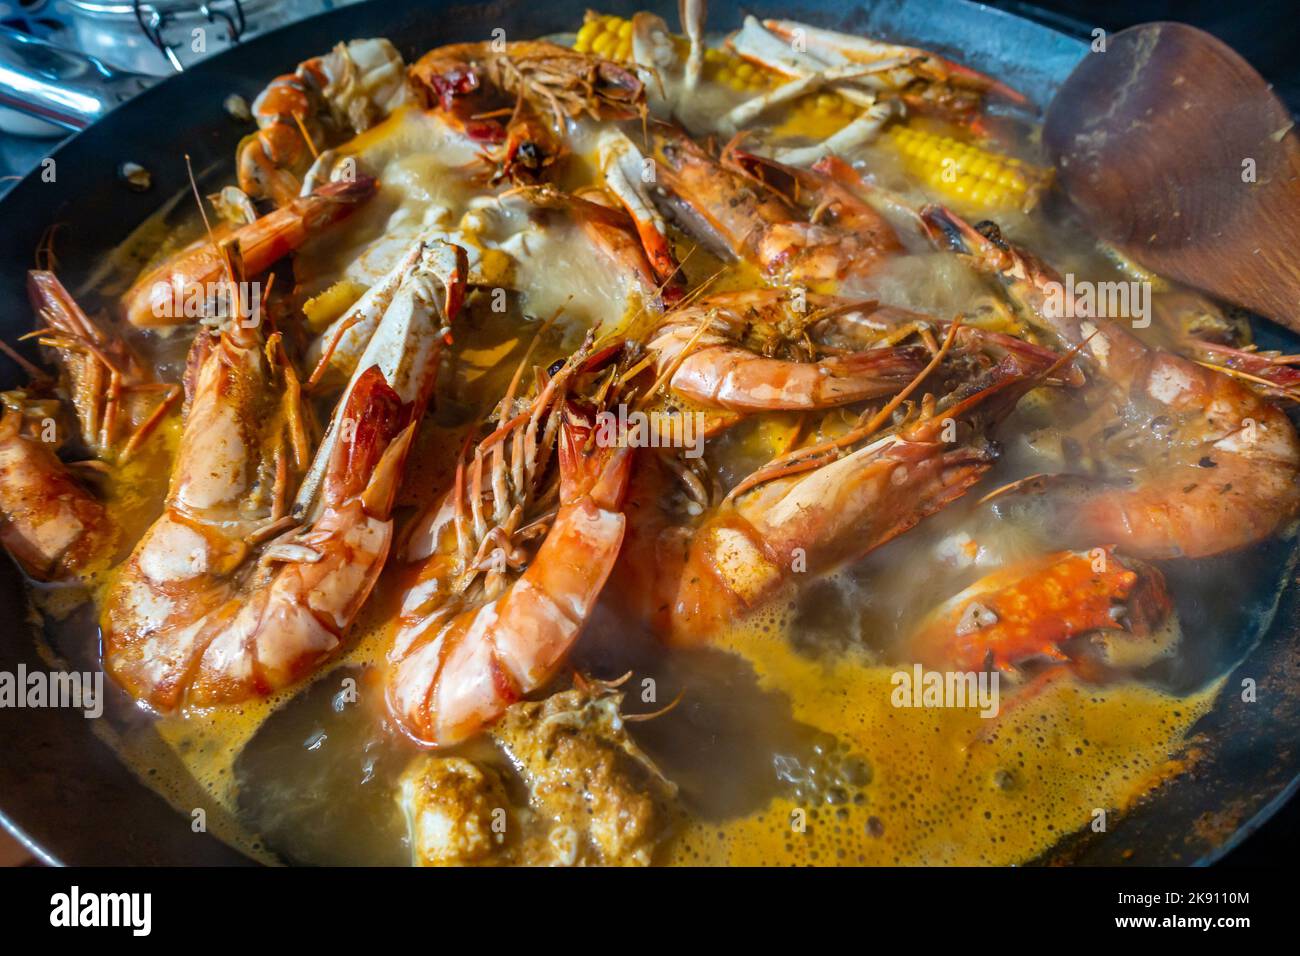 Seafood boil with crabs, prawns and corn on the cob boiling in a wok on a hob in a home kitchen. Stock Photo